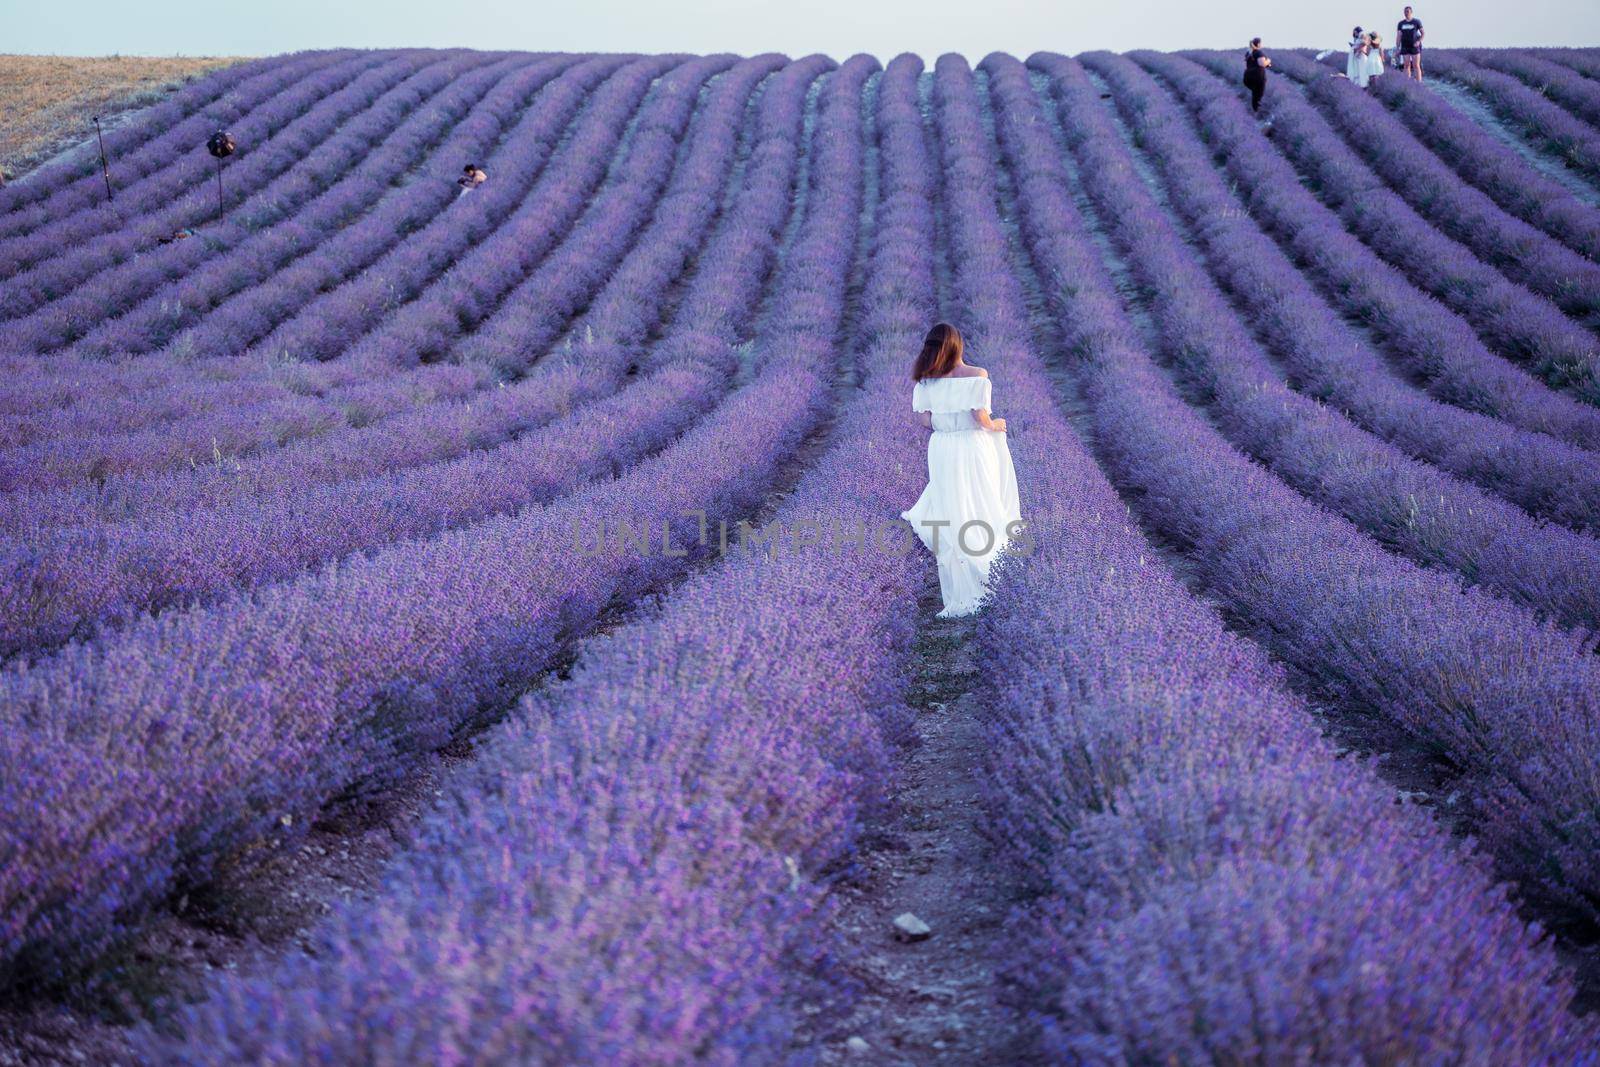 Among the lavender fields. A beautiful girl runs against the background of a large lavender field.